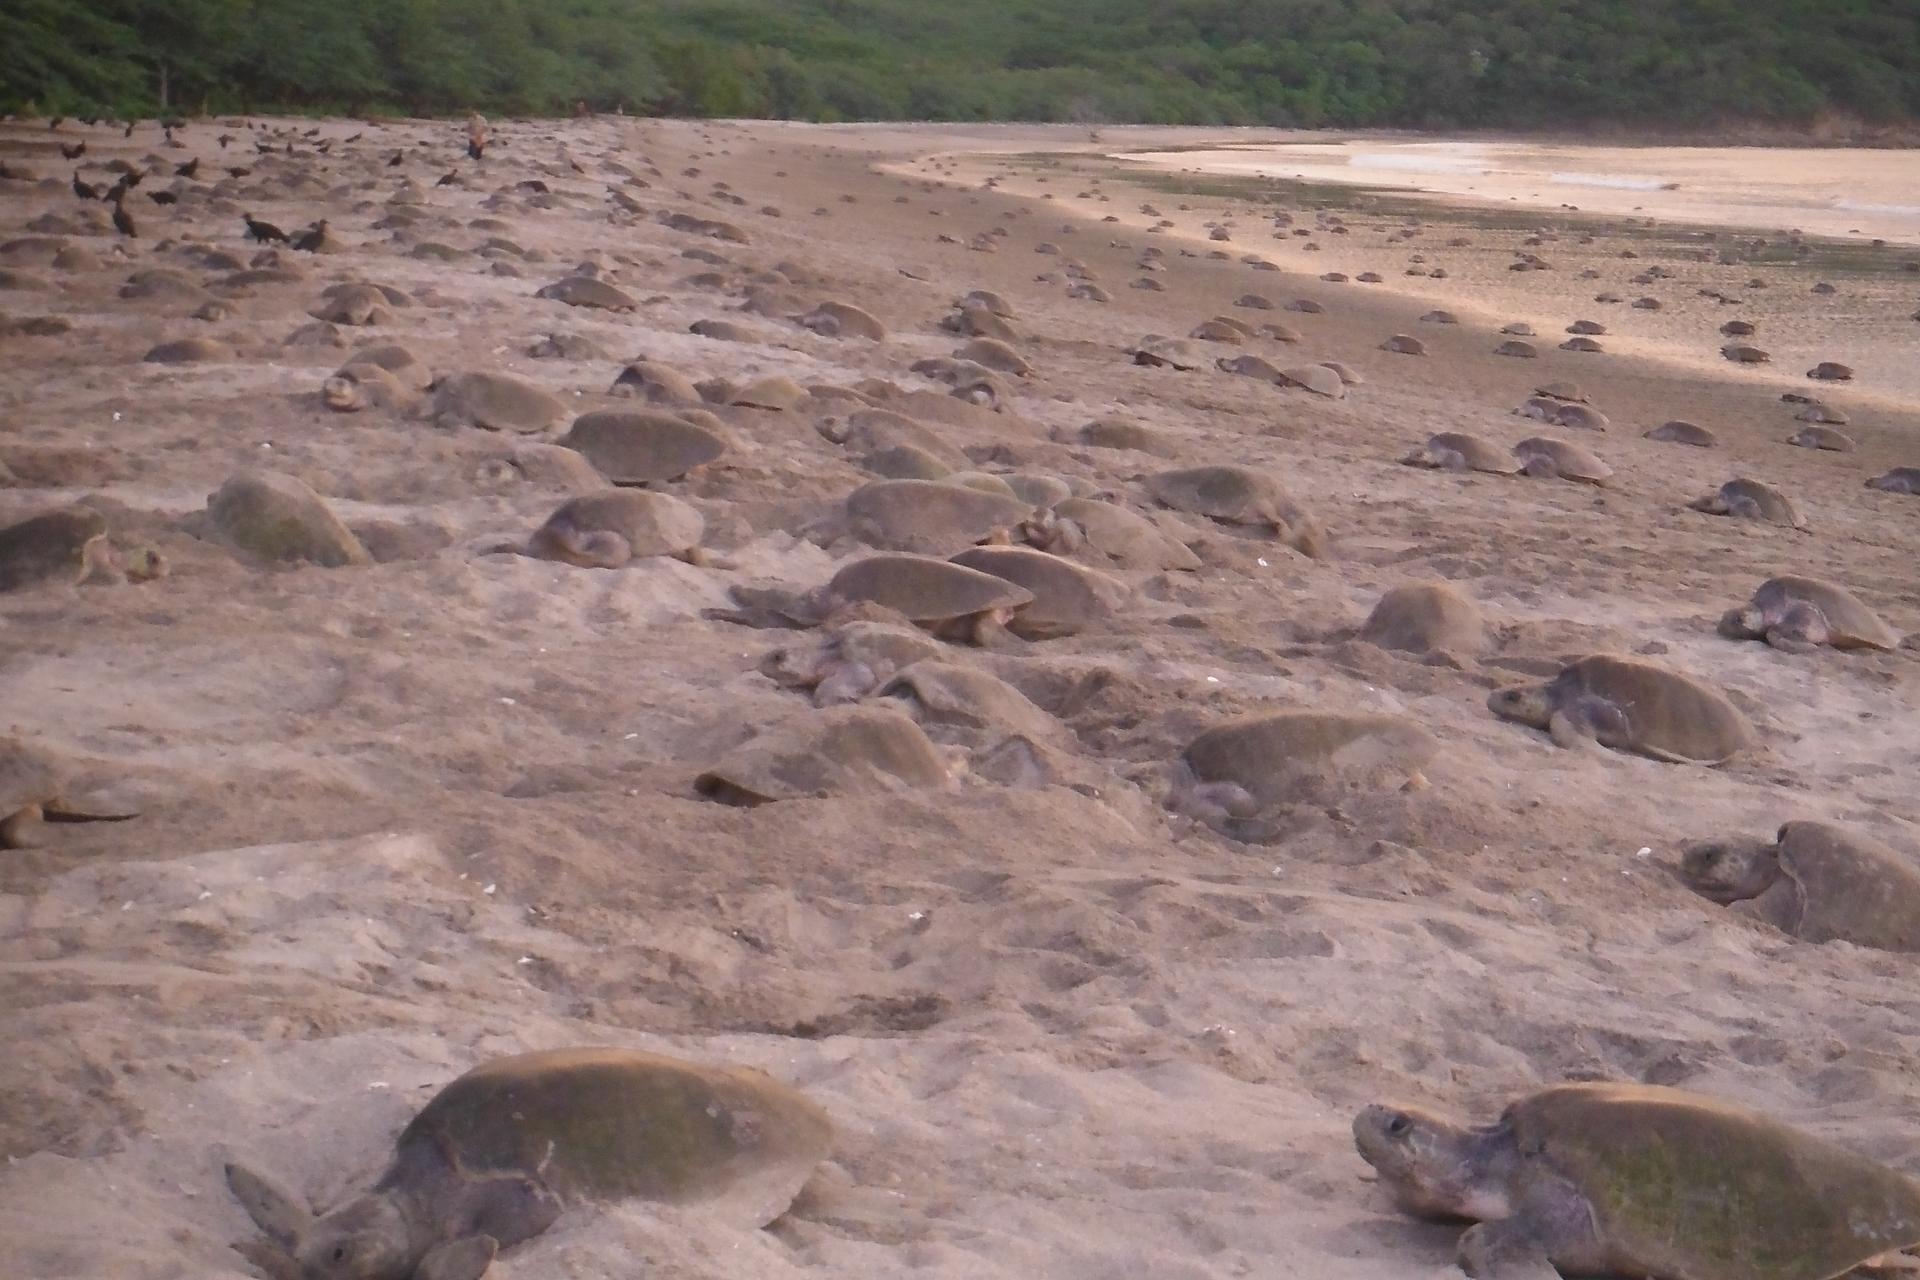 At the height of nesting seasons, hundreds of turtles can come to the beach to lay their eggs.